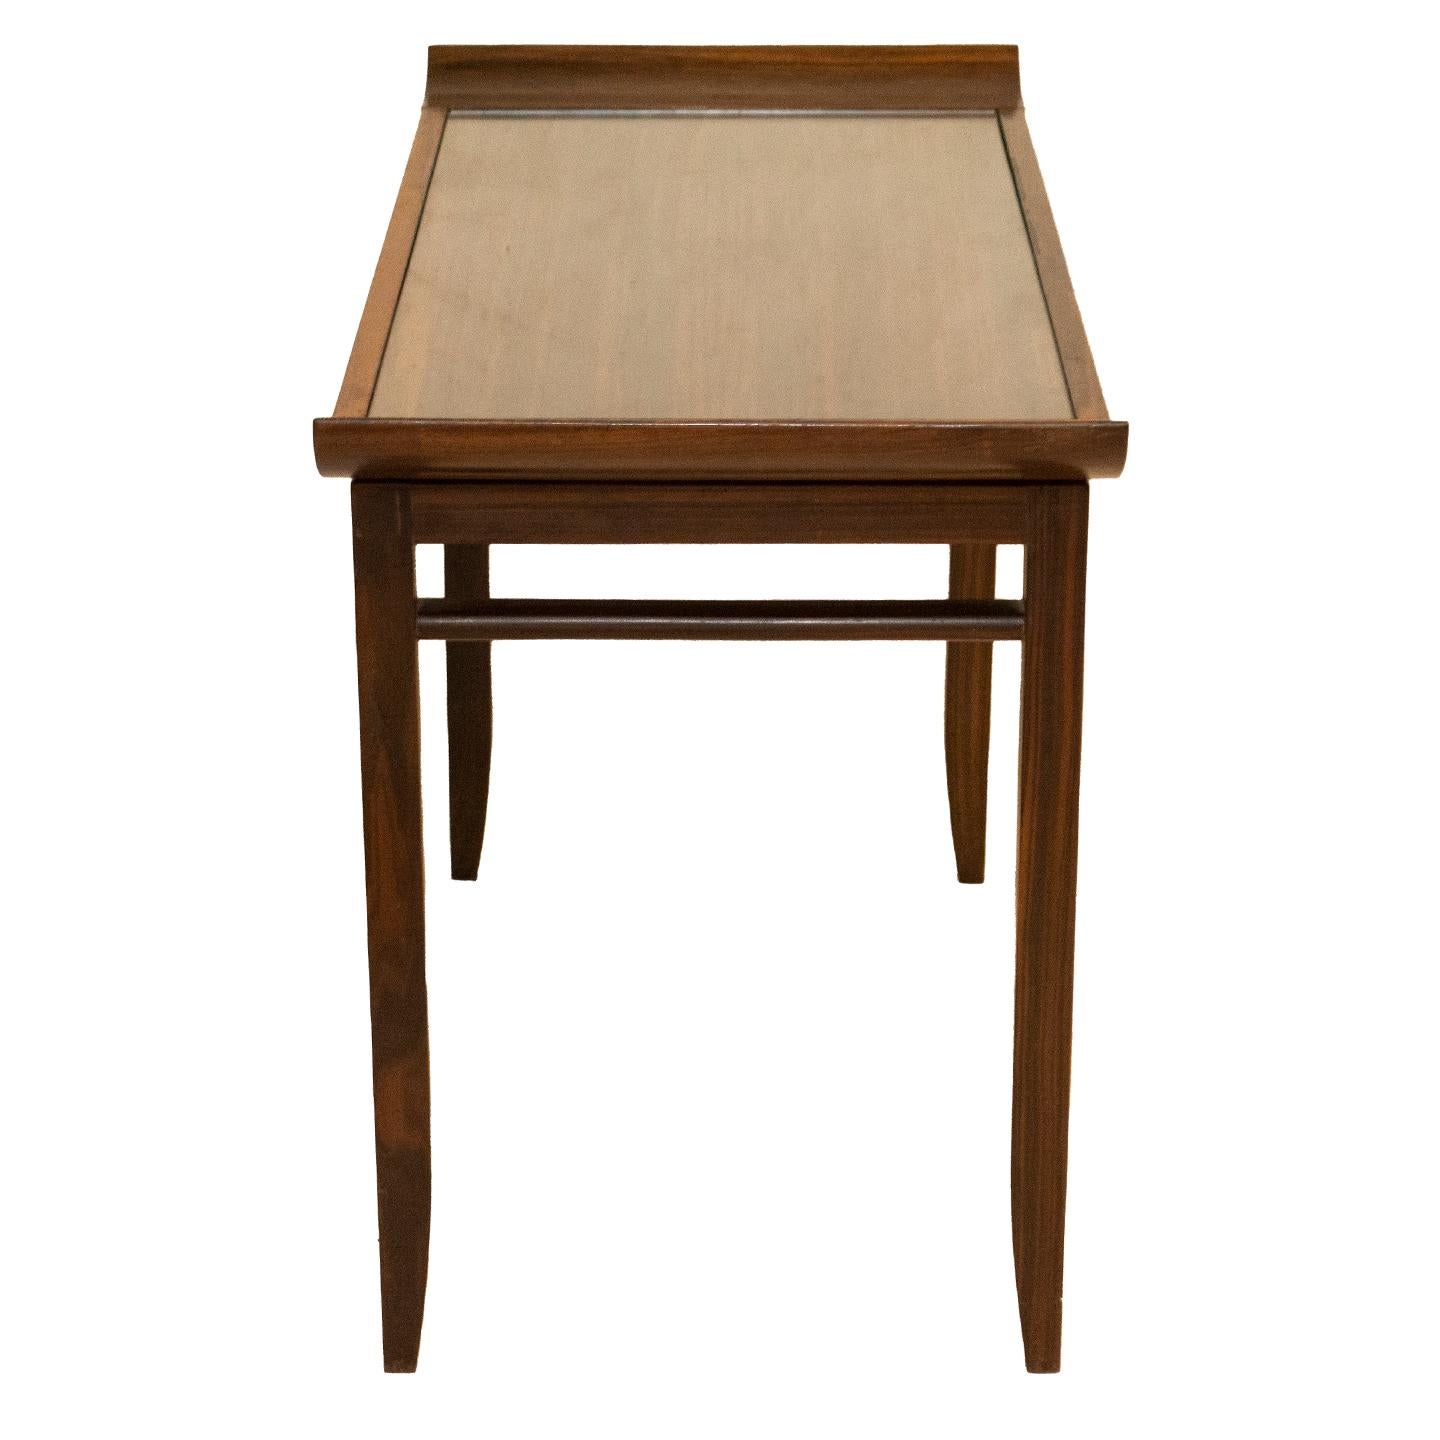 Exceptionally made tea table out of Circassian walnut. The graining of Circassian walnut is know for its dramatic. This tea table would double nicely cocktail table. Suitable for all interiors traditional to contemporary.